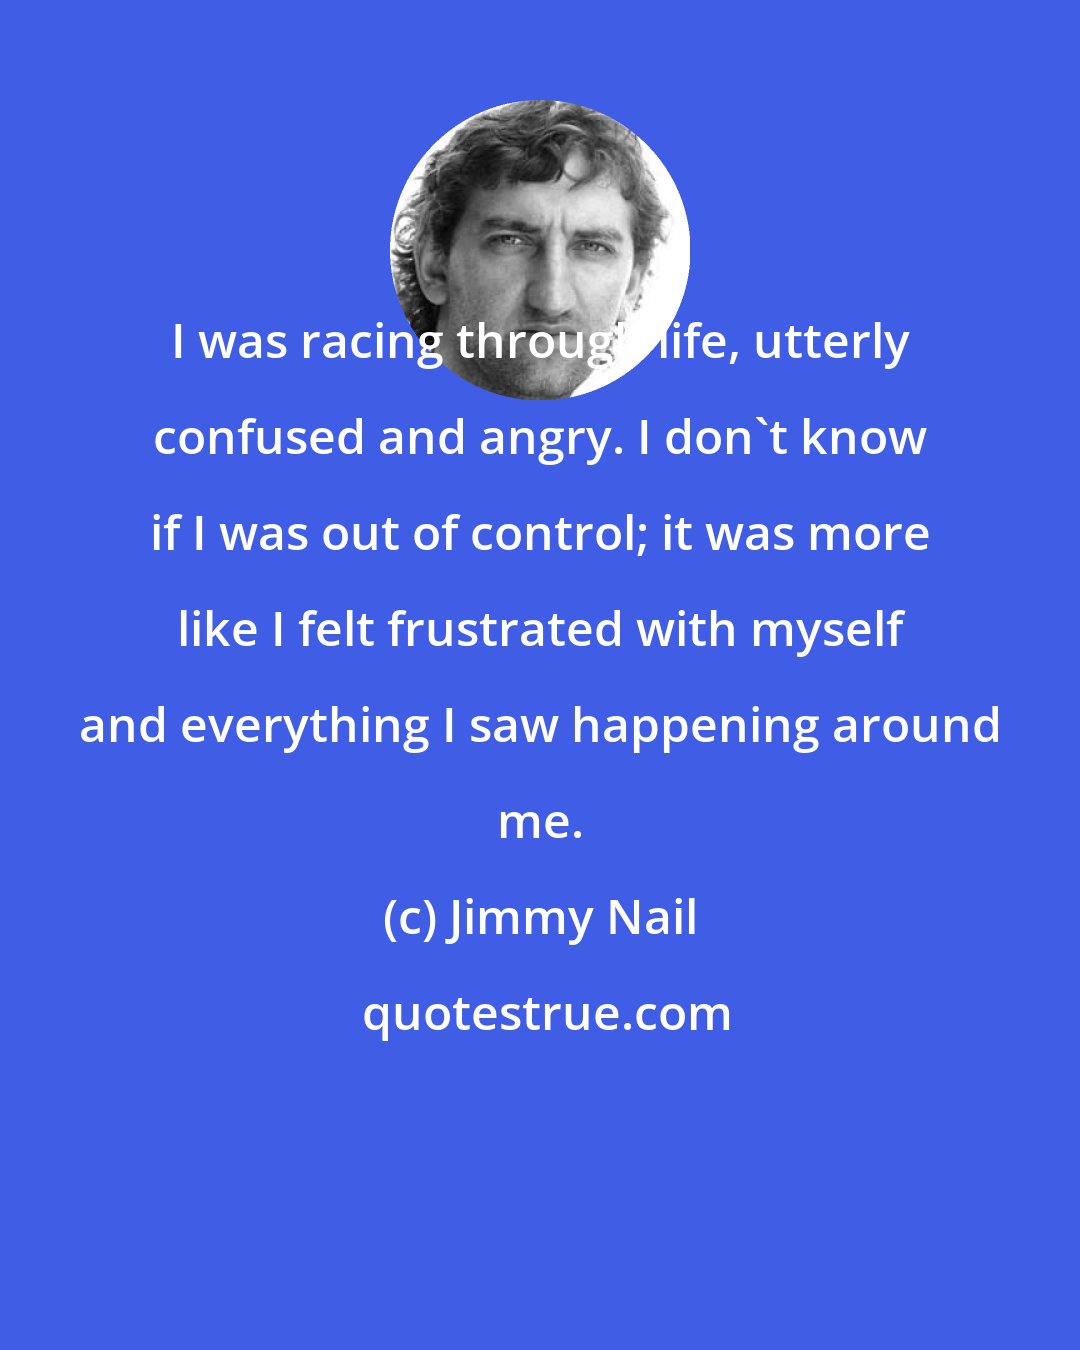 Jimmy Nail: I was racing through life, utterly confused and angry. I don't know if I was out of control; it was more like I felt frustrated with myself and everything I saw happening around me.